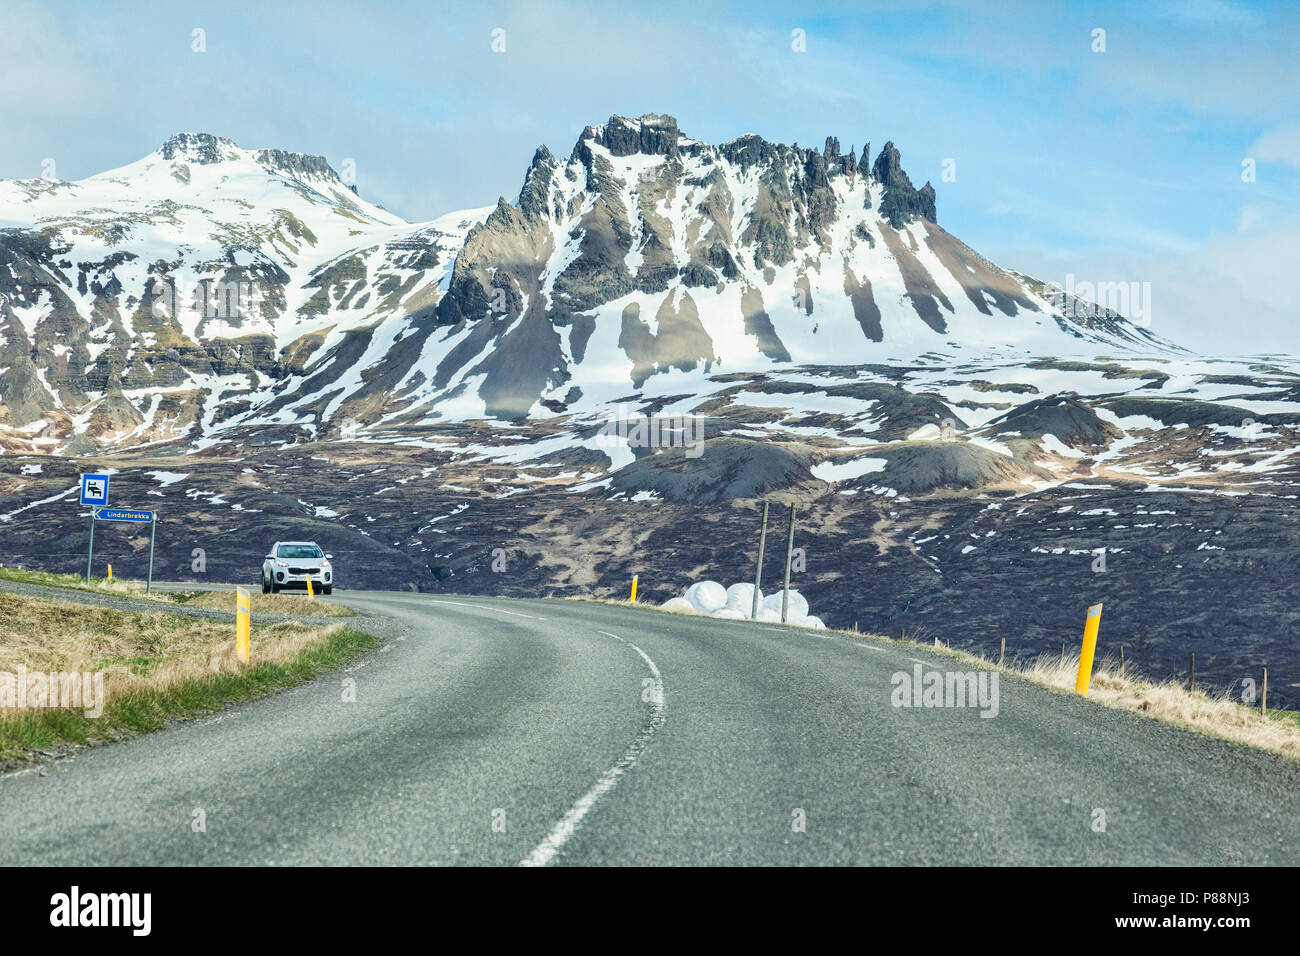 28 April 2018: South Iceland - Through the windscreen shot of the Iceland Ring Road in South Island, driving through snowy mountain scenery. Probably  Stock Photo